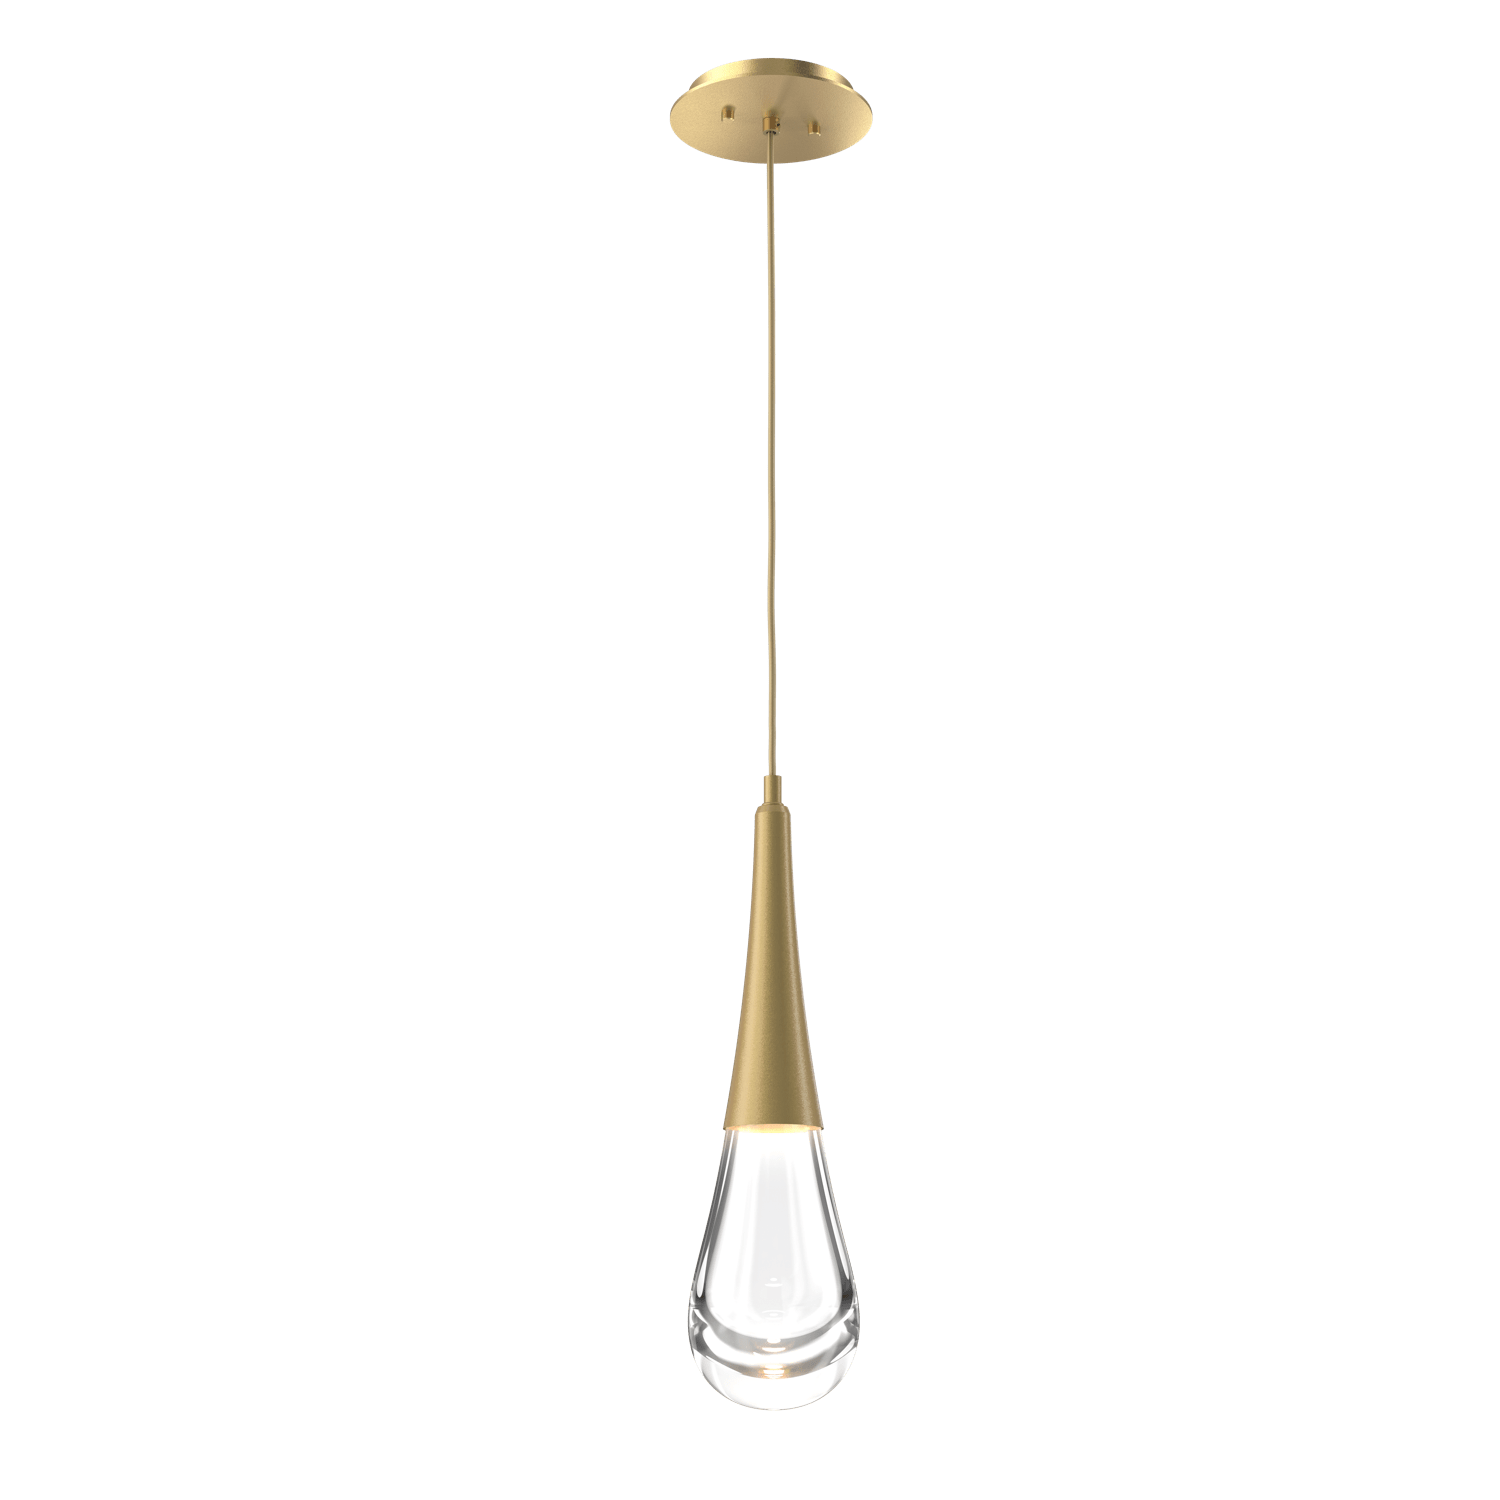 LAB0078-01-GB-Hammerton-Studio-Raindrop-pendant-light-with-gilded-brass-finish-and-clear-blown-glass-shades-and-LED-lamping